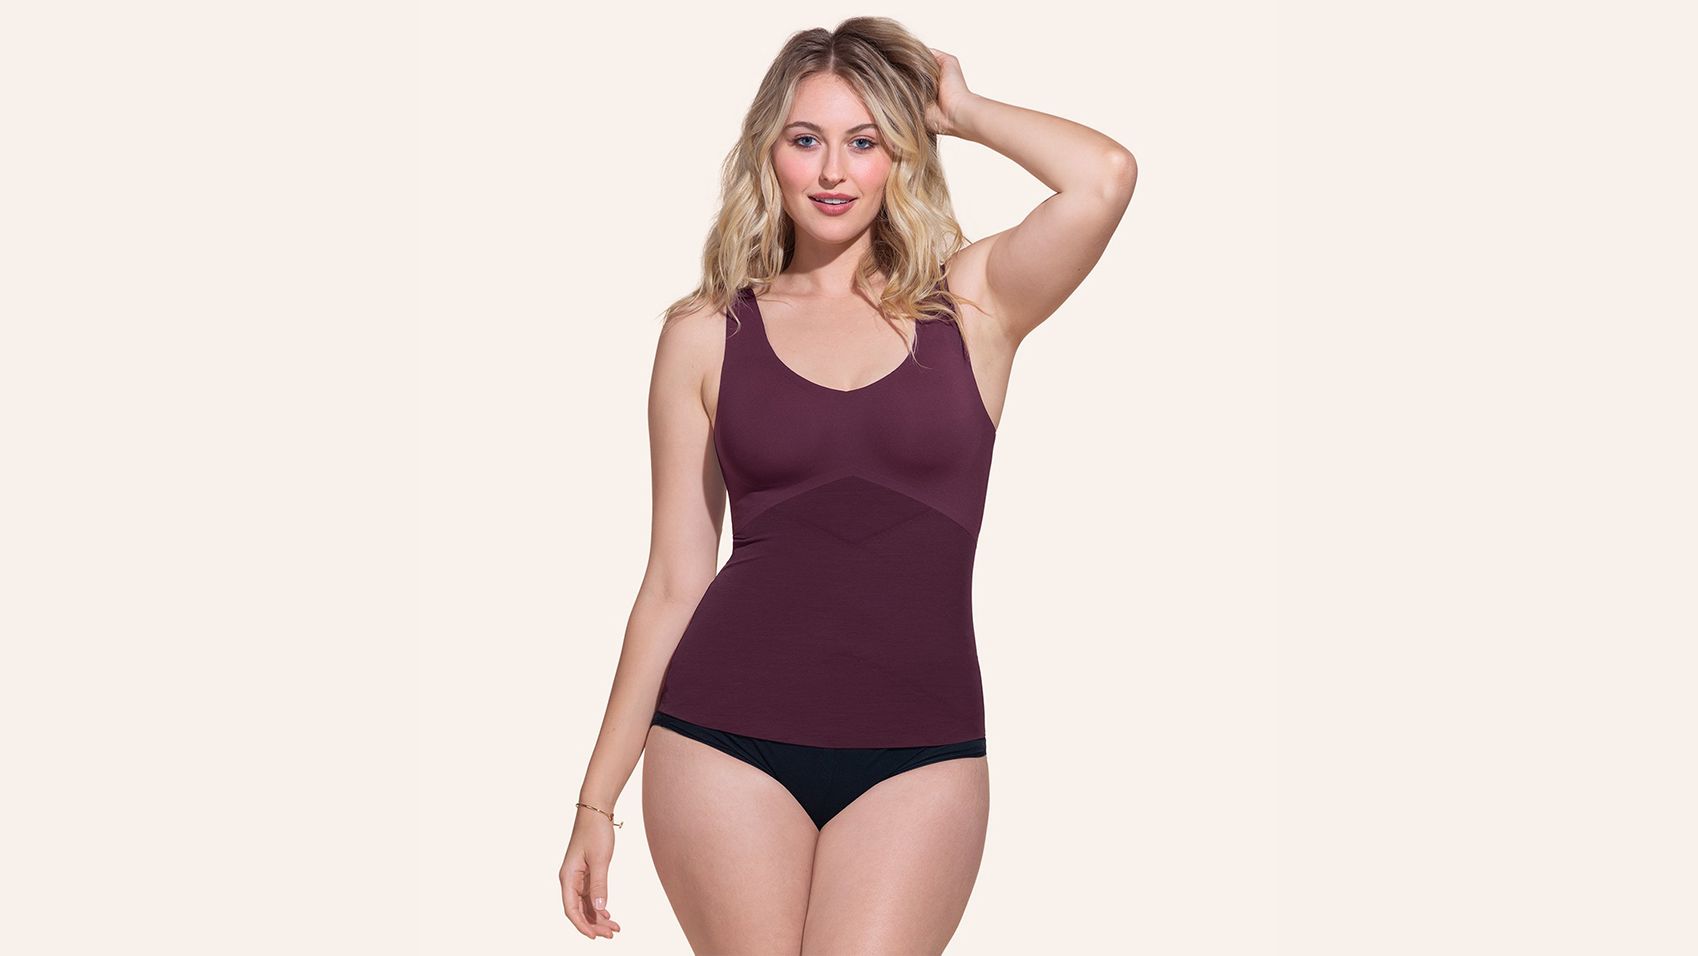 Thanks to the Swee Shapewear which delivers softer, lighter and